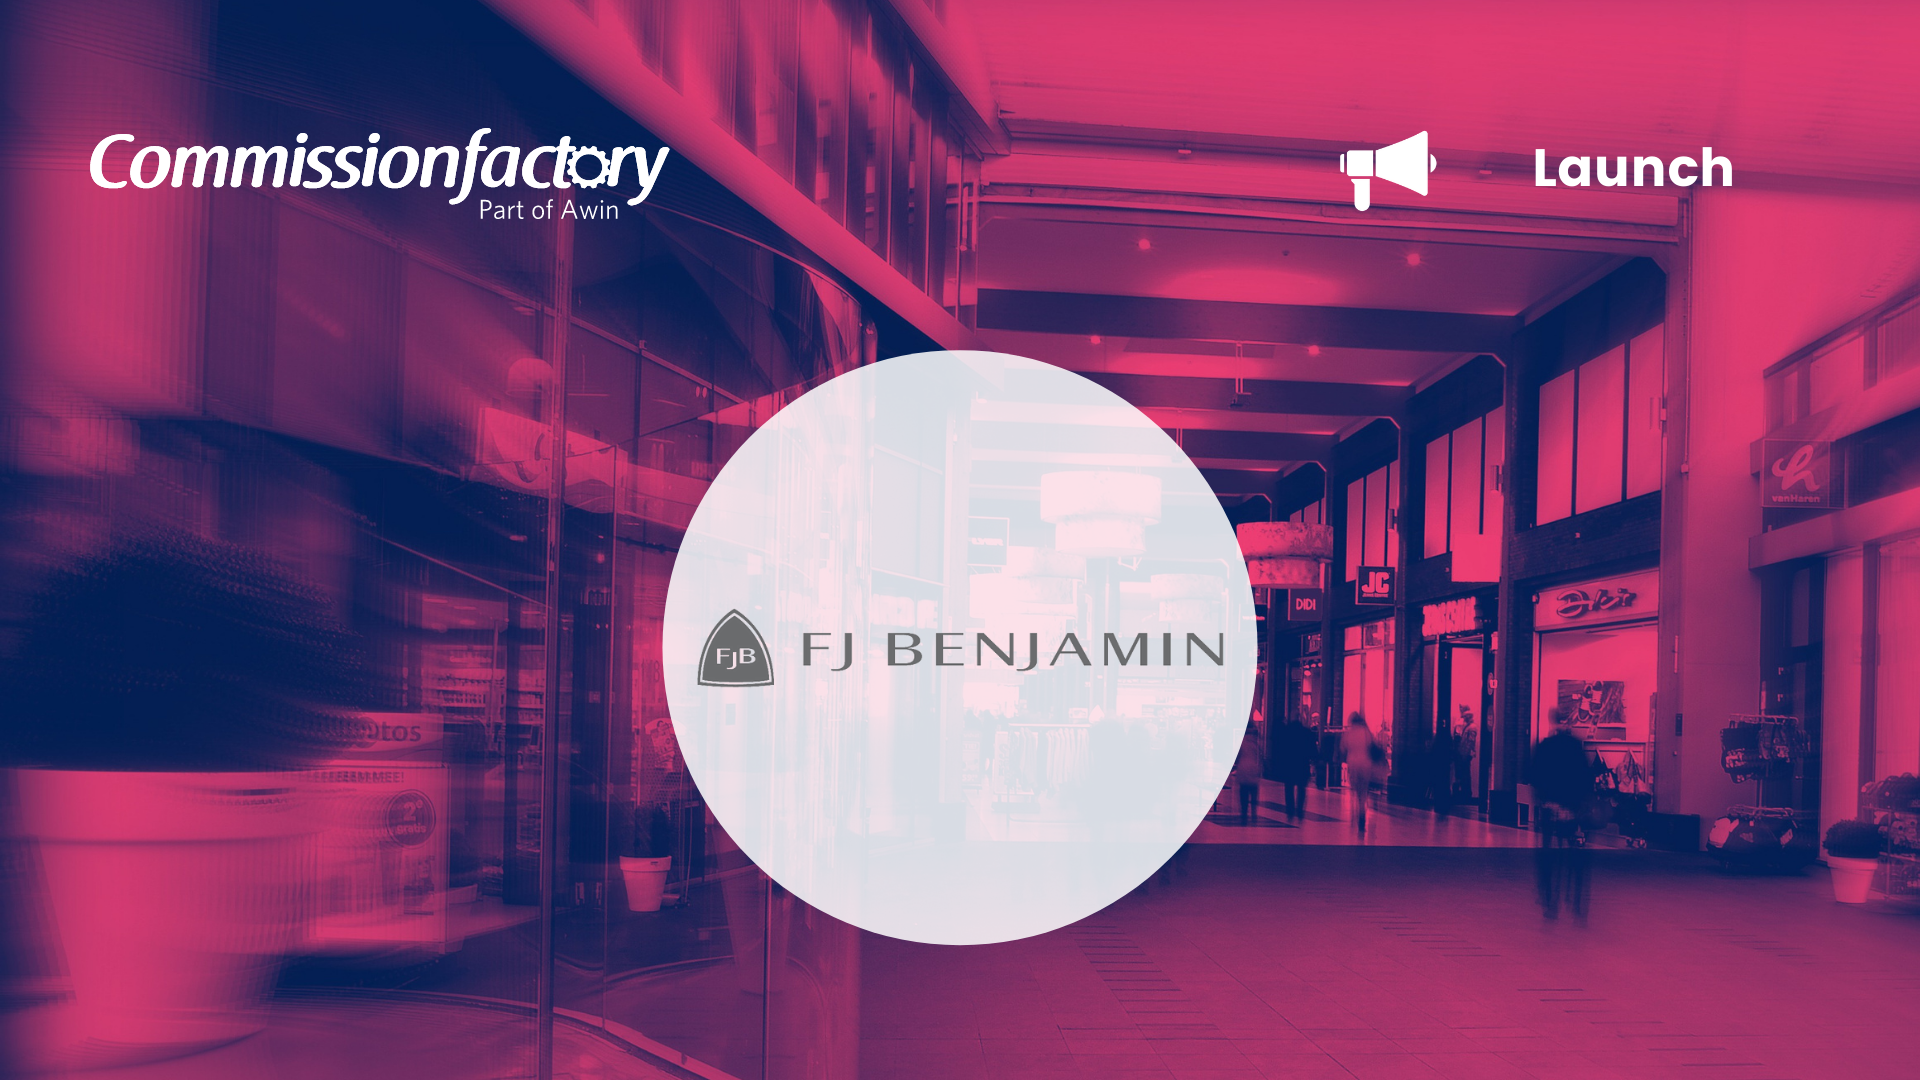 Commission Factory Begins Partnership With F J Benjamin